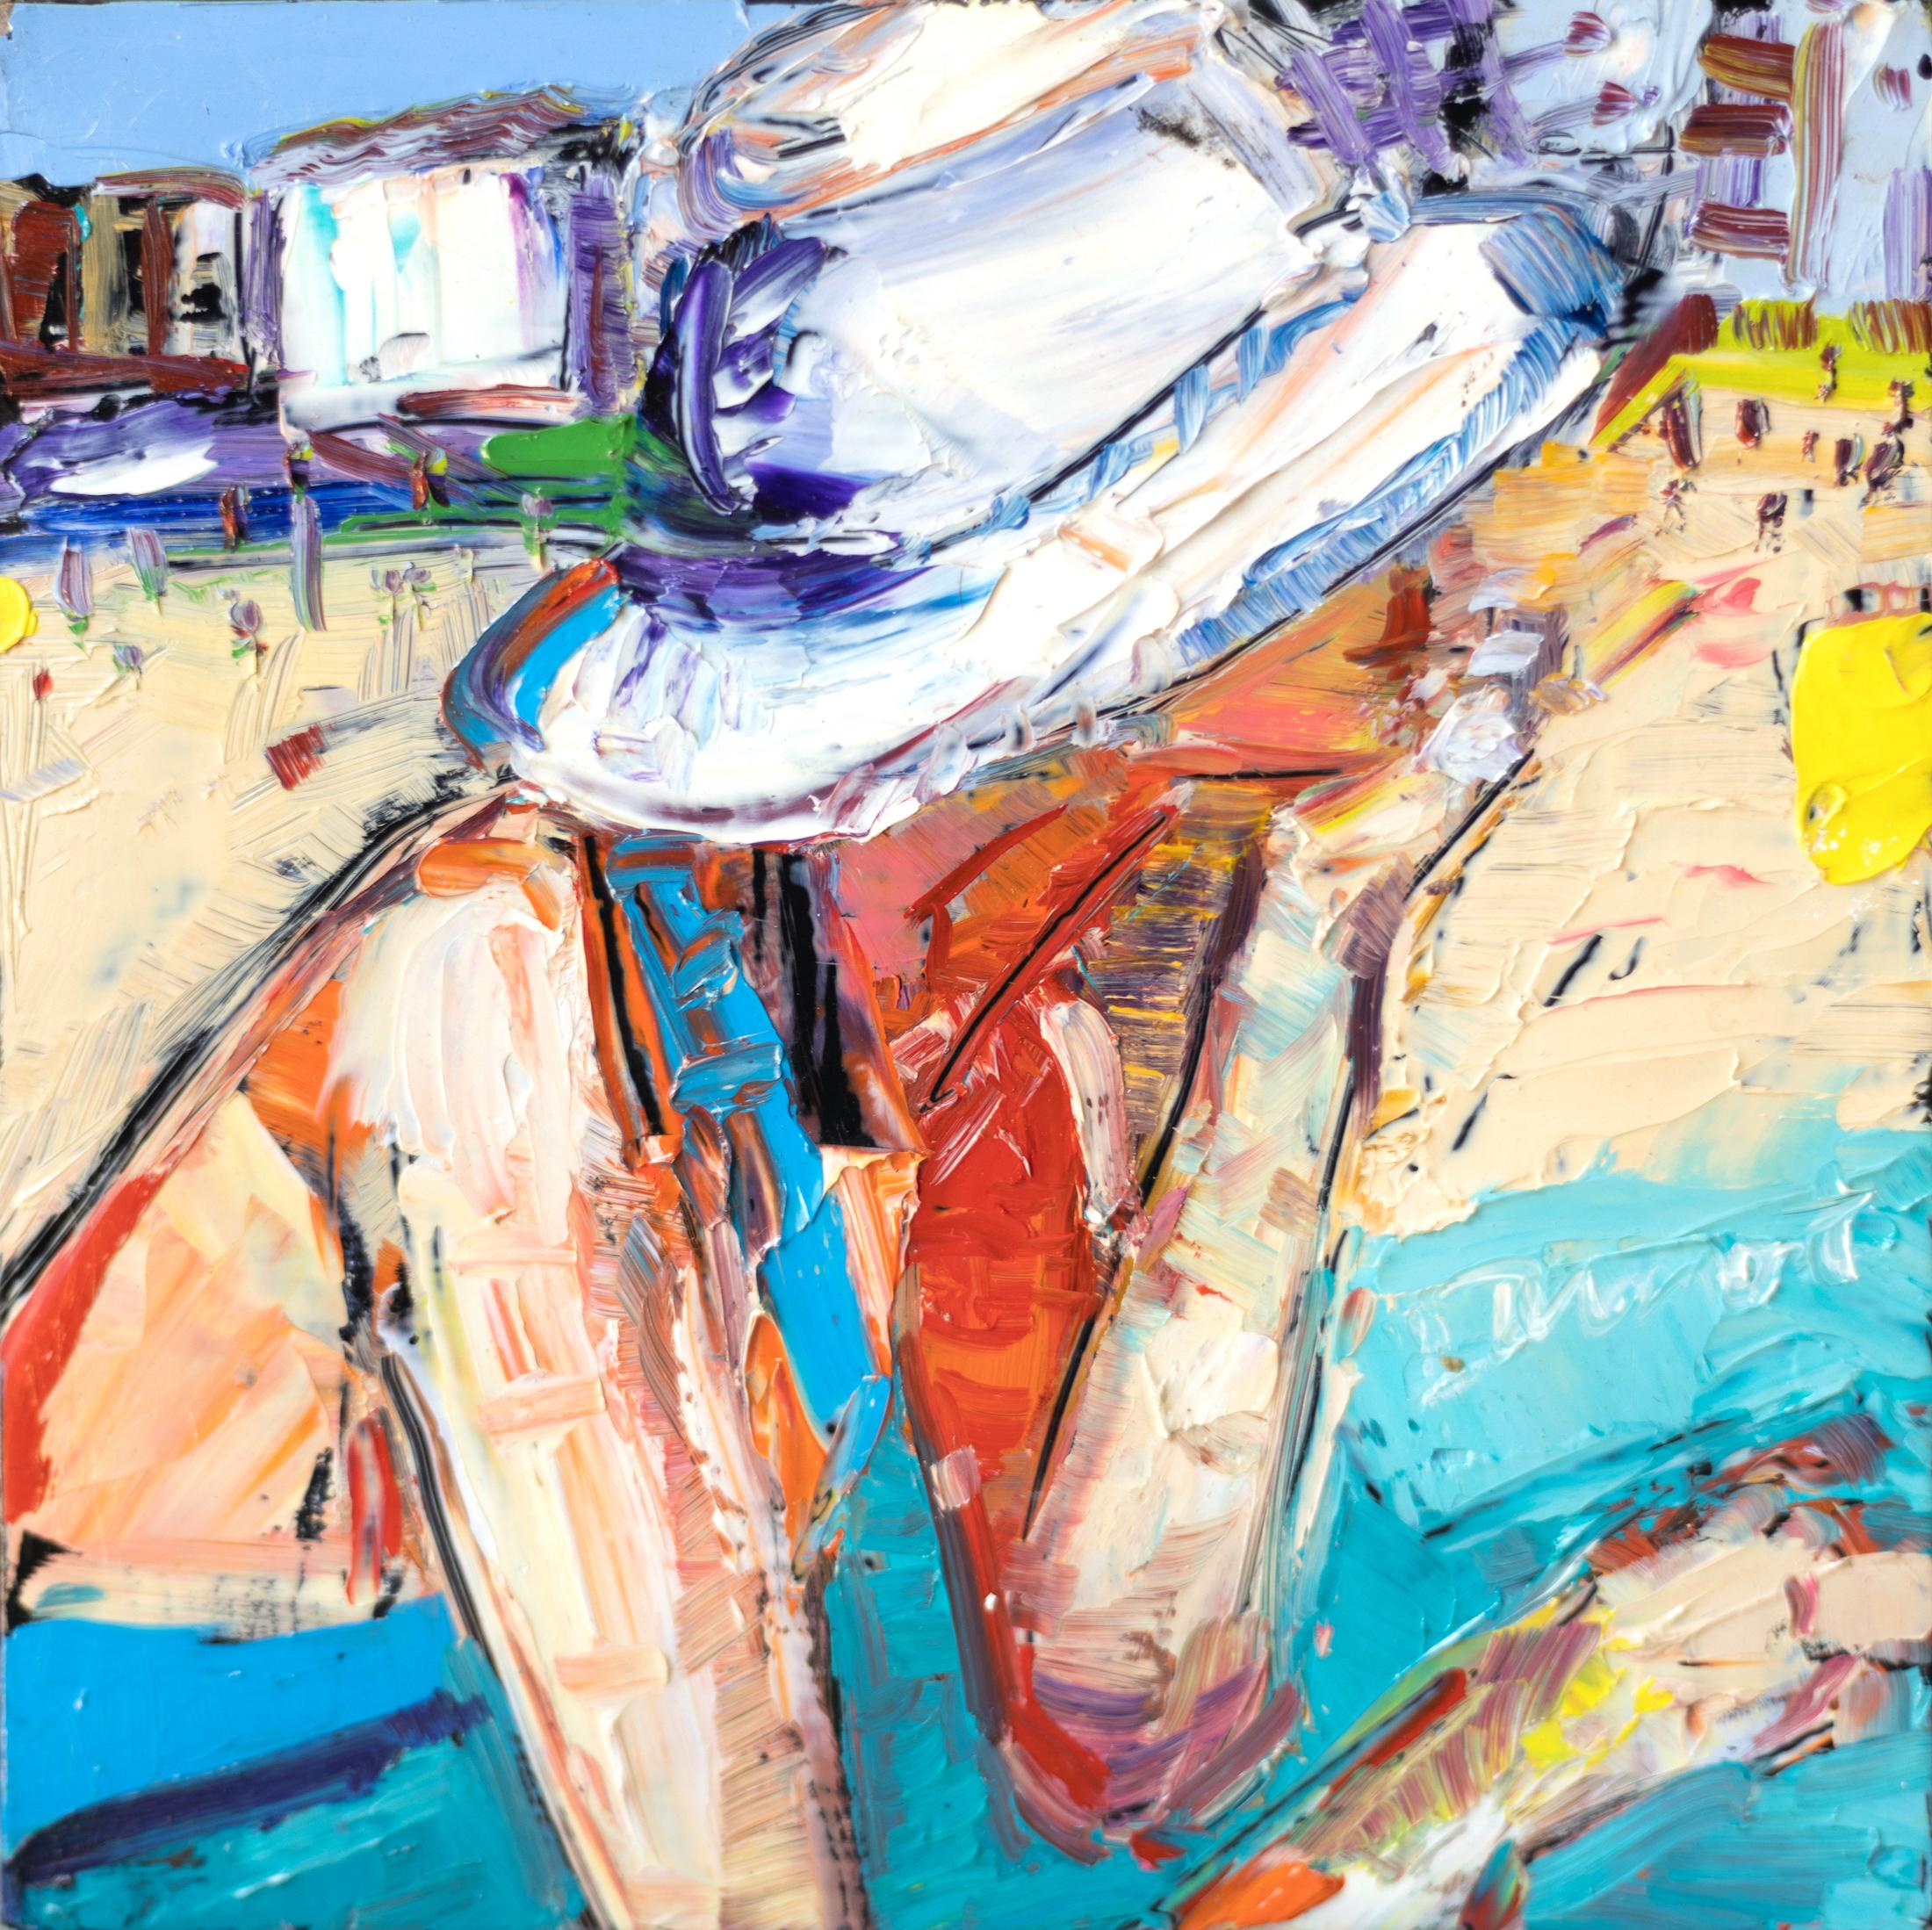 Linda Dumont Figurative Painting - "Dreaming on the Beach" Expressionist Figurative Woman